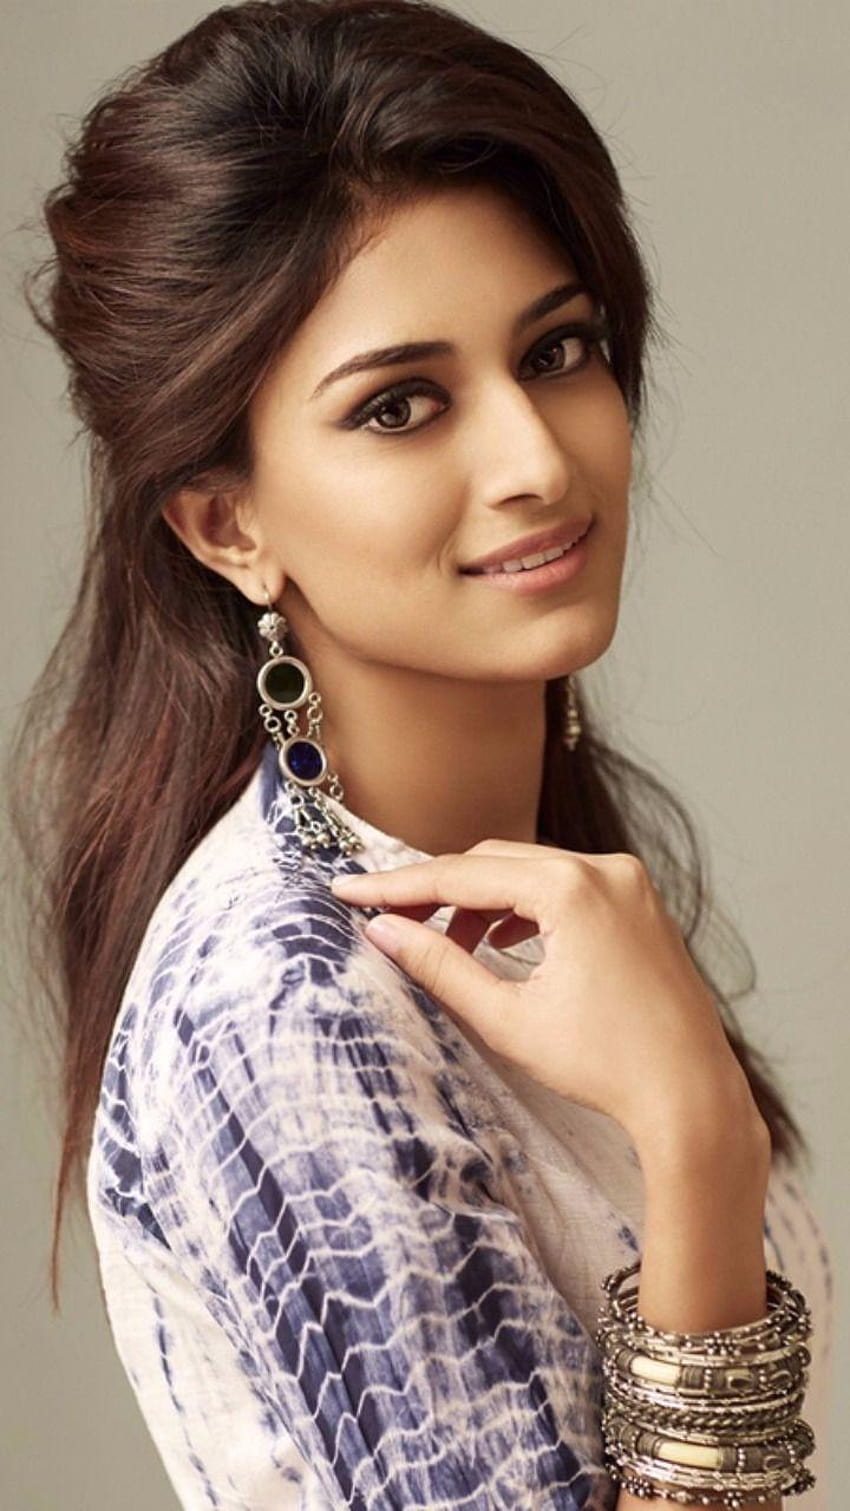 South Indian Actress For Mobile 2, bollywood actress for mobile HD phone wallpaper